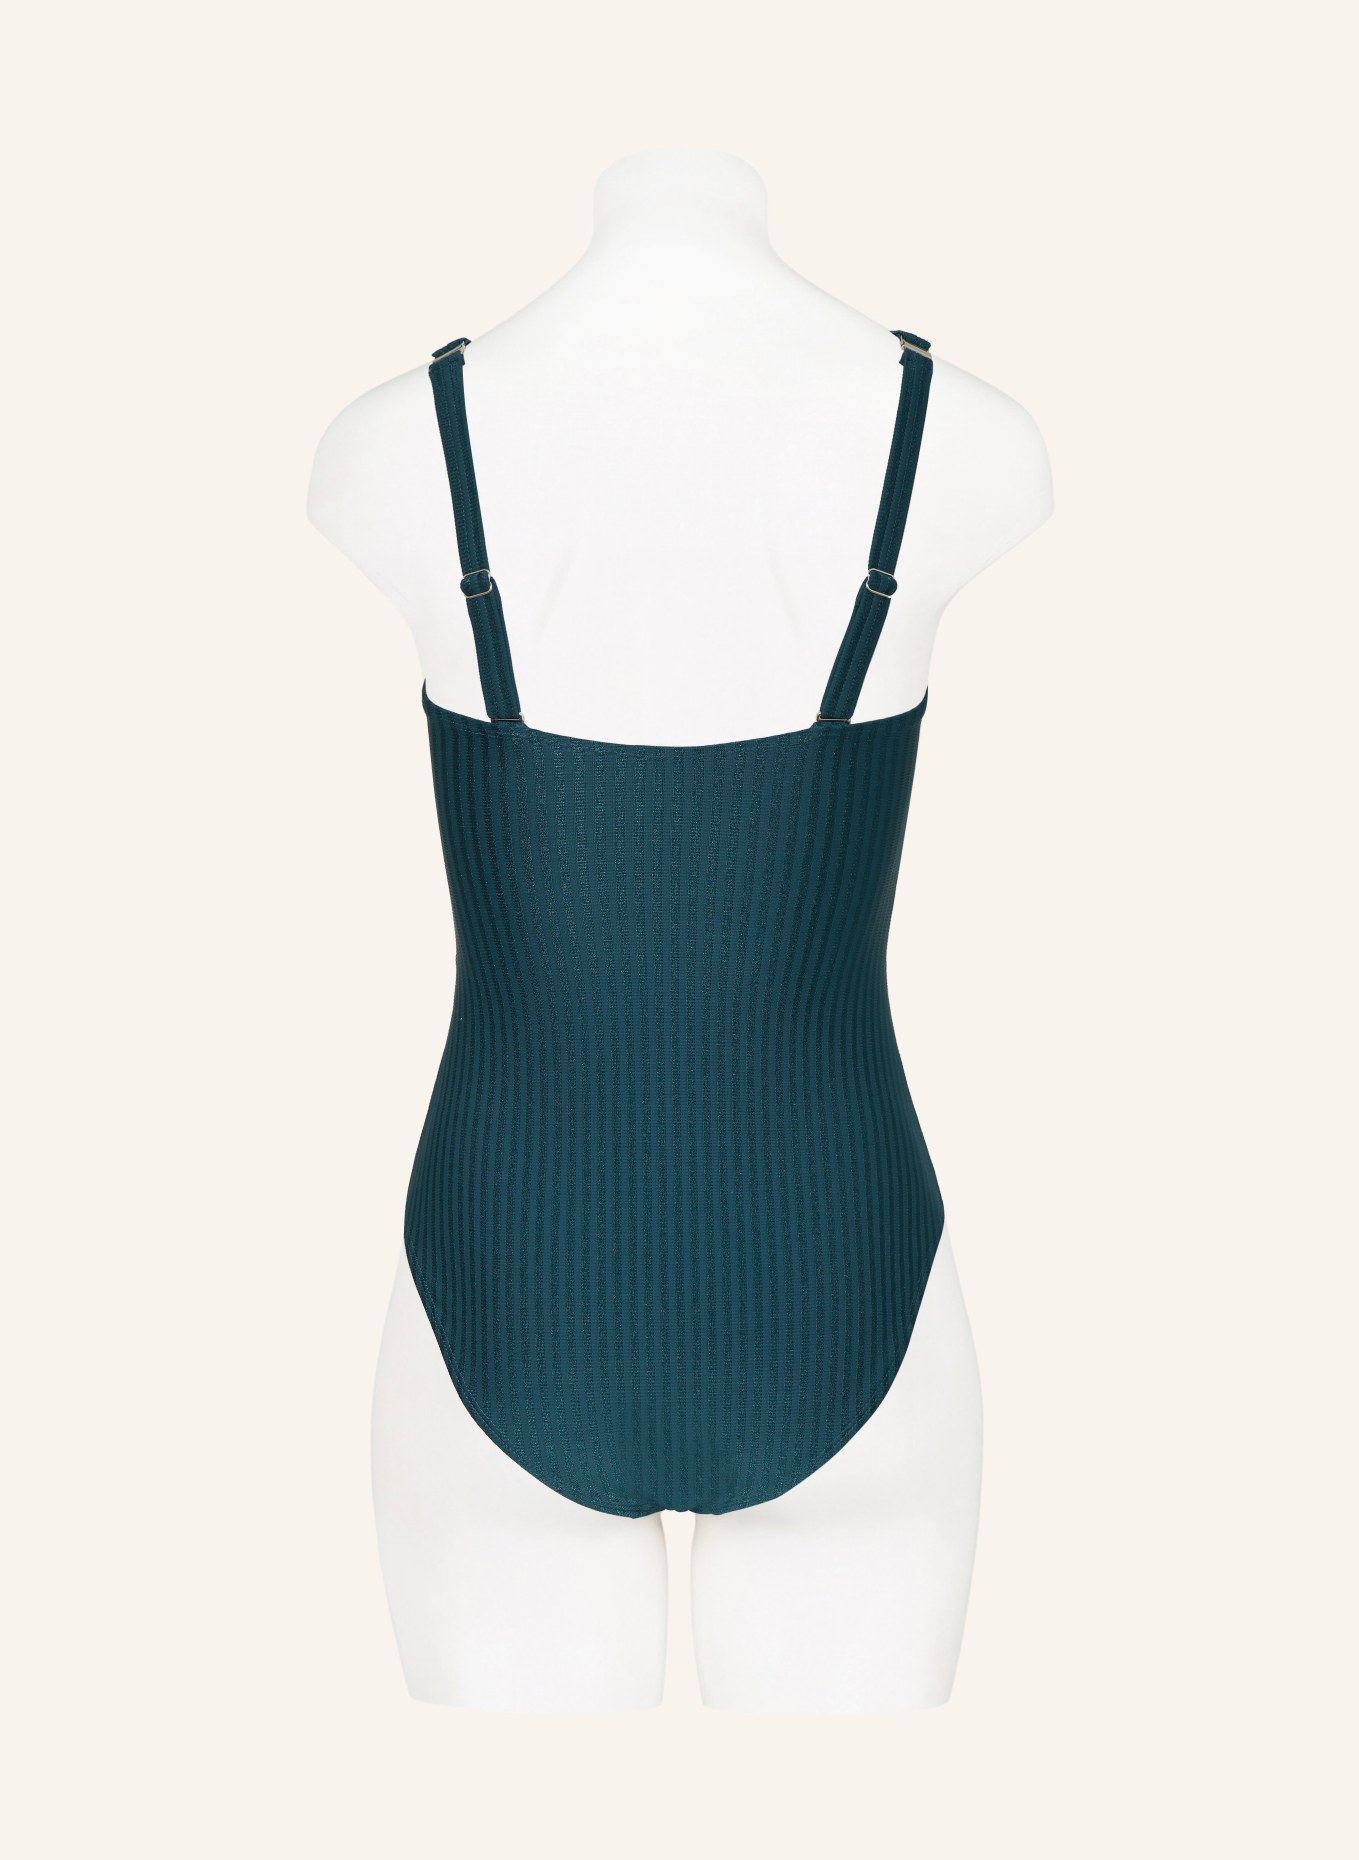 BEACHLIFE Swimsuit REFLECTING POND, Color: TEAL (Image 3)